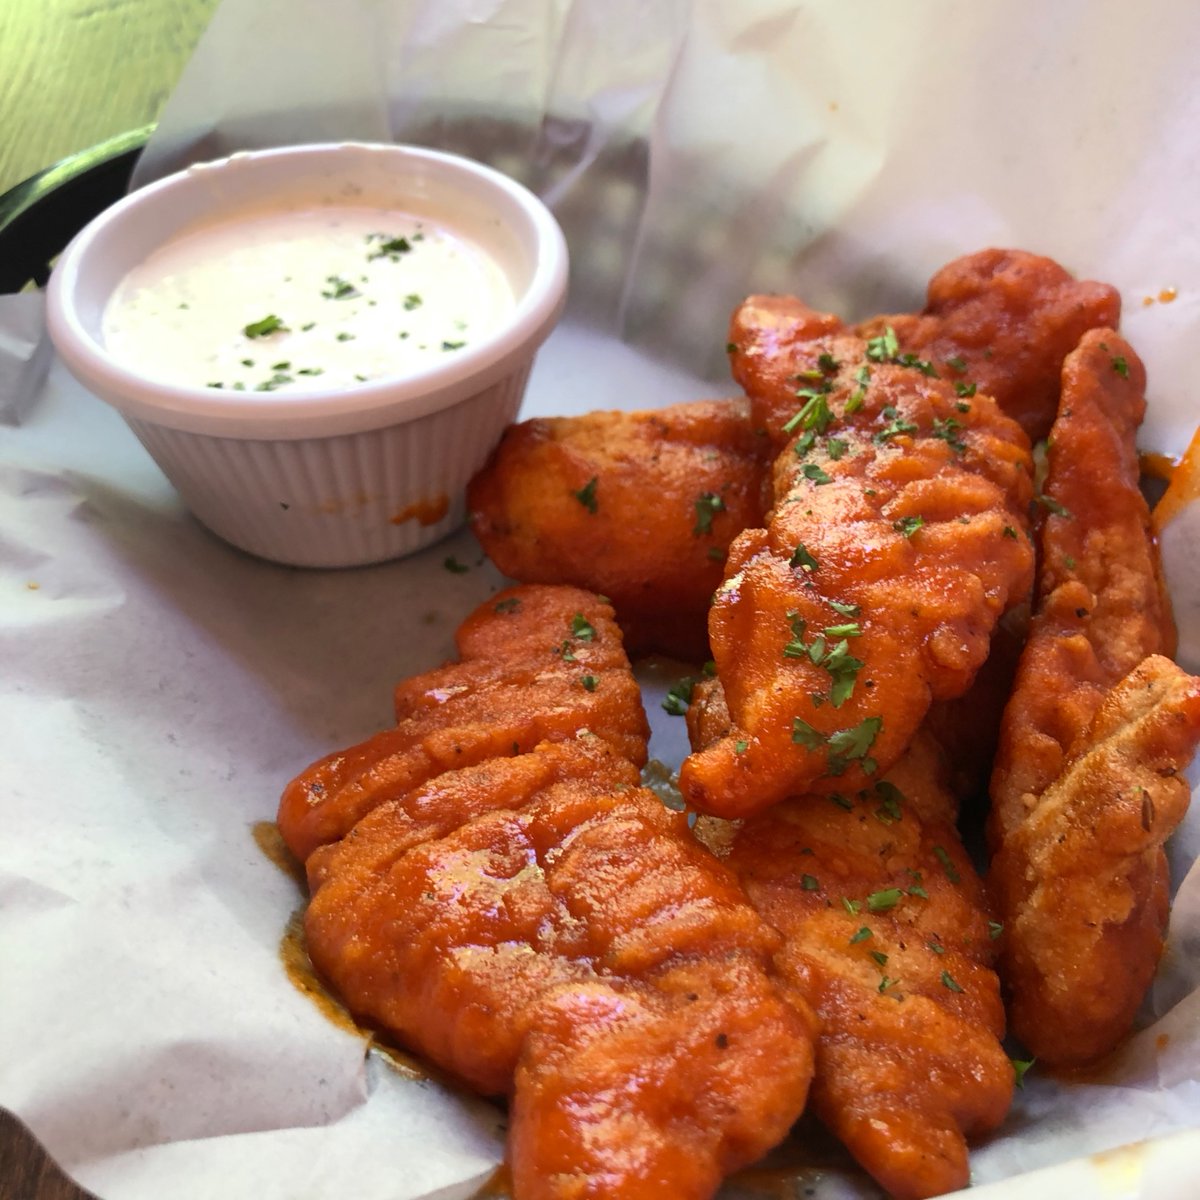 Need a little boom-boom for your taste buds? Dive into our Atomic Tenders and let the flavor explosion begin! 💣🍗

#flavorexplosion #lovelocal #whitehousepizza #pizza #carbondalecolorado #colorado #roaringforkvalley